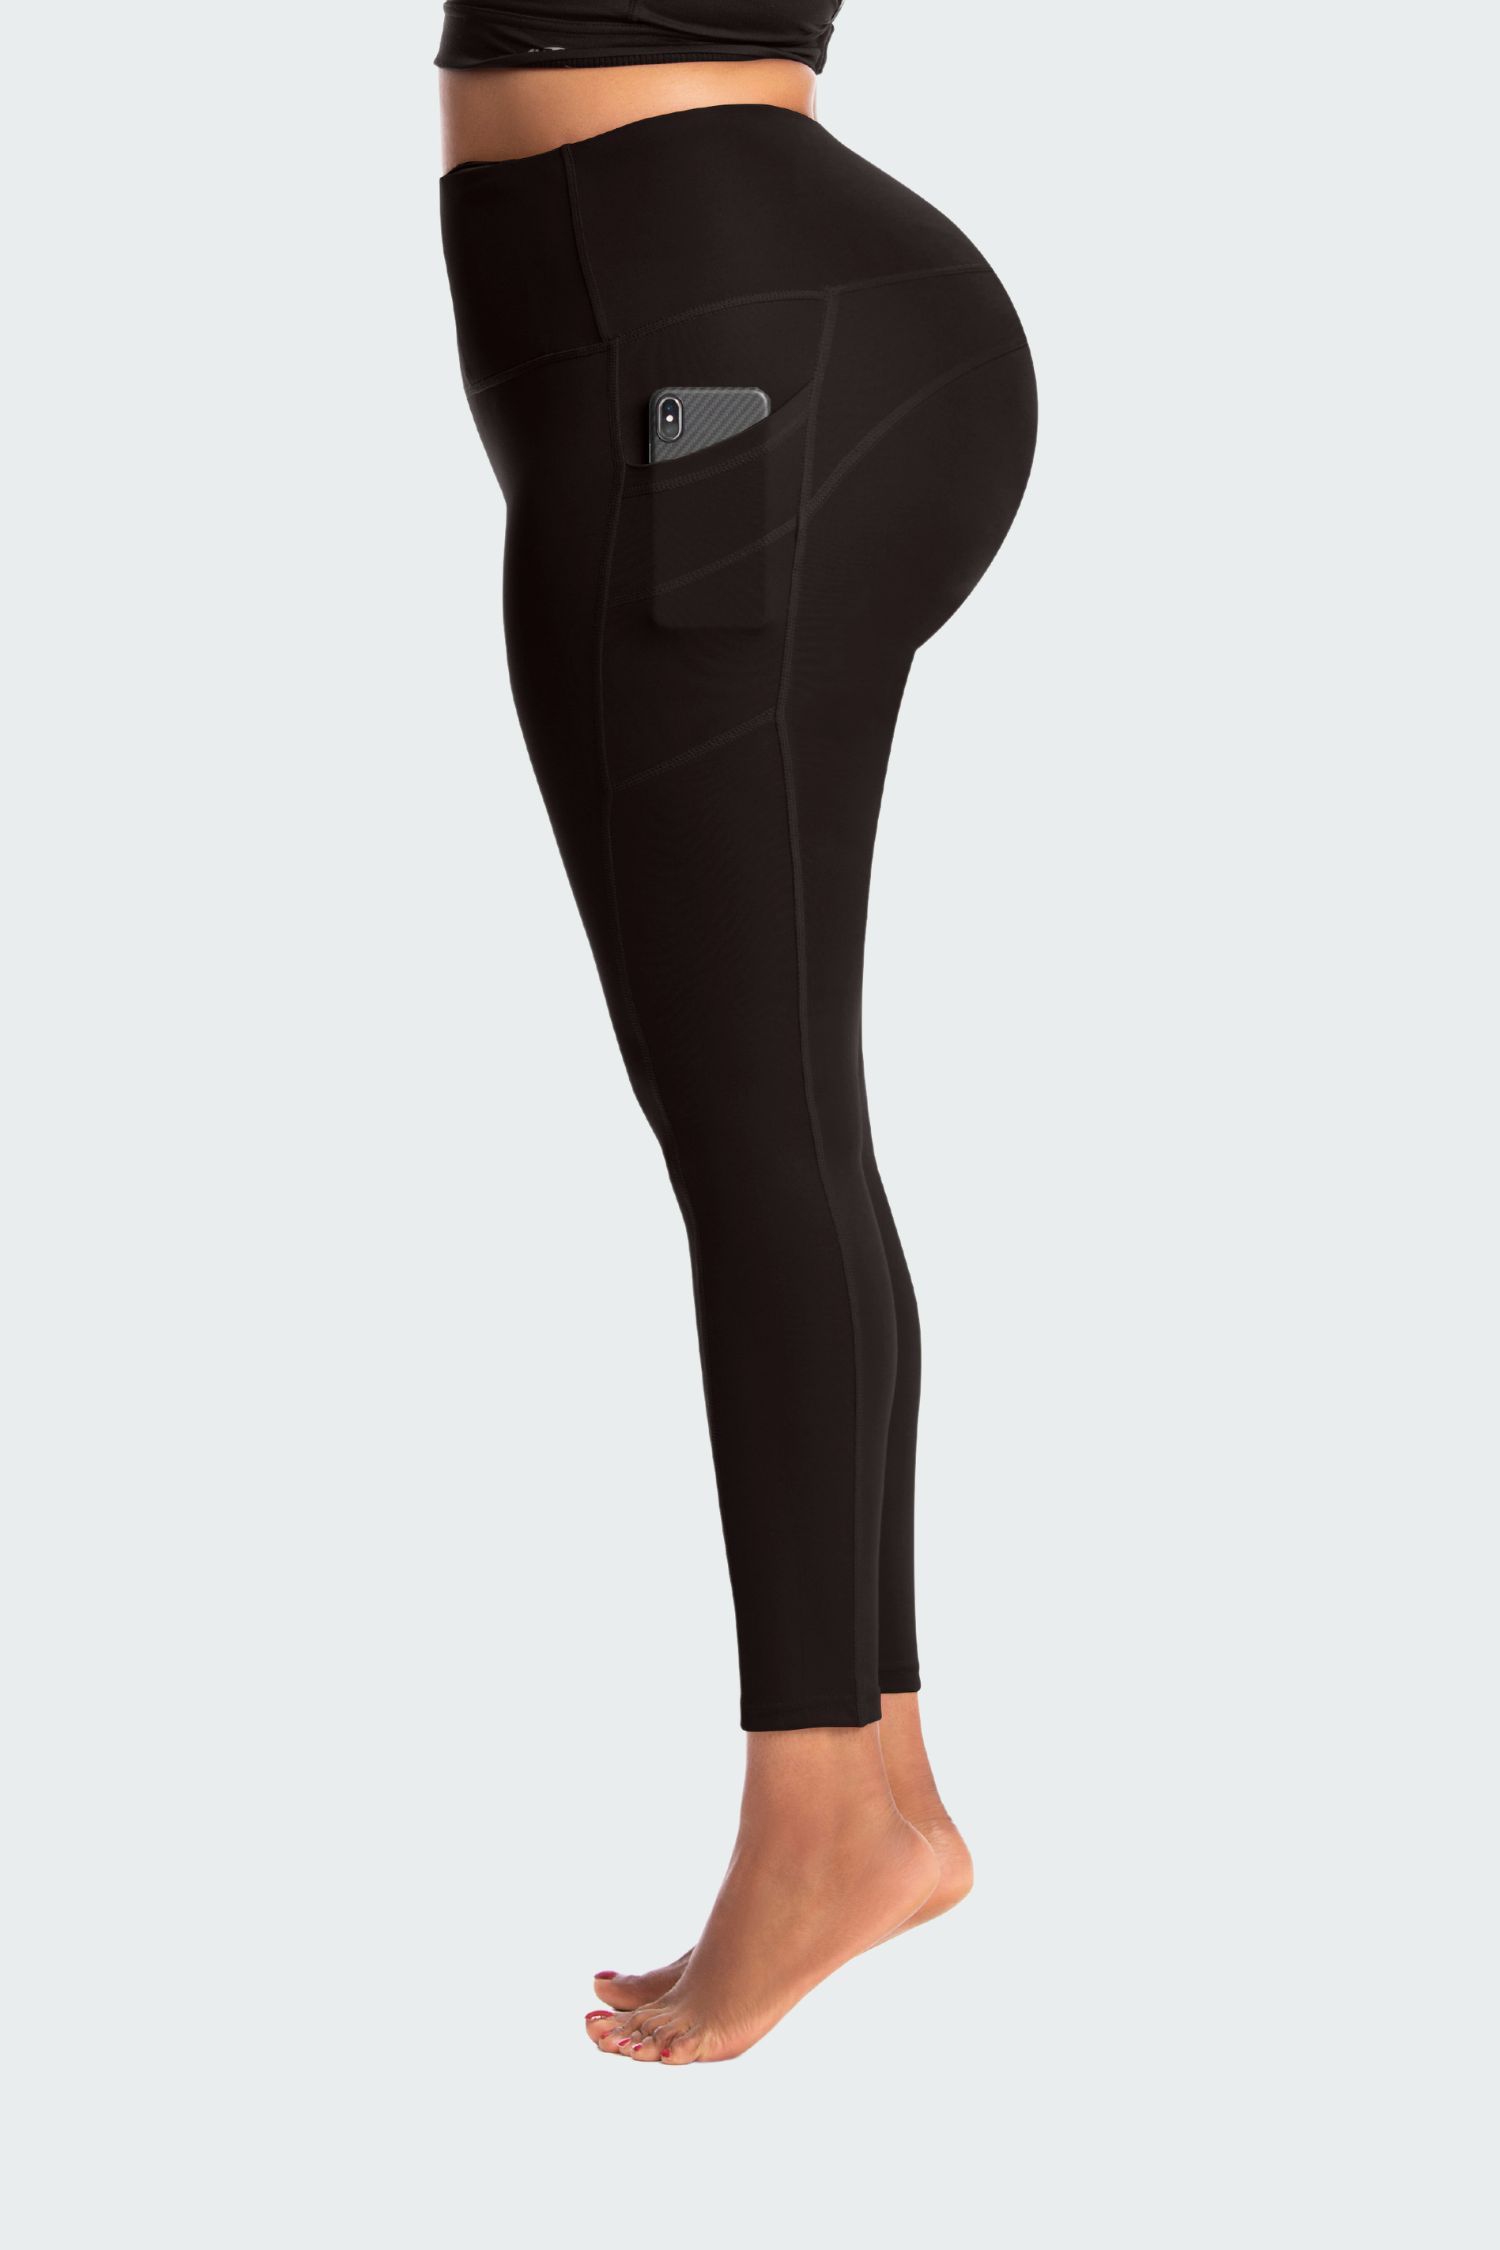 Plus Size High Waisted Leggings With Pockets - Heny Star